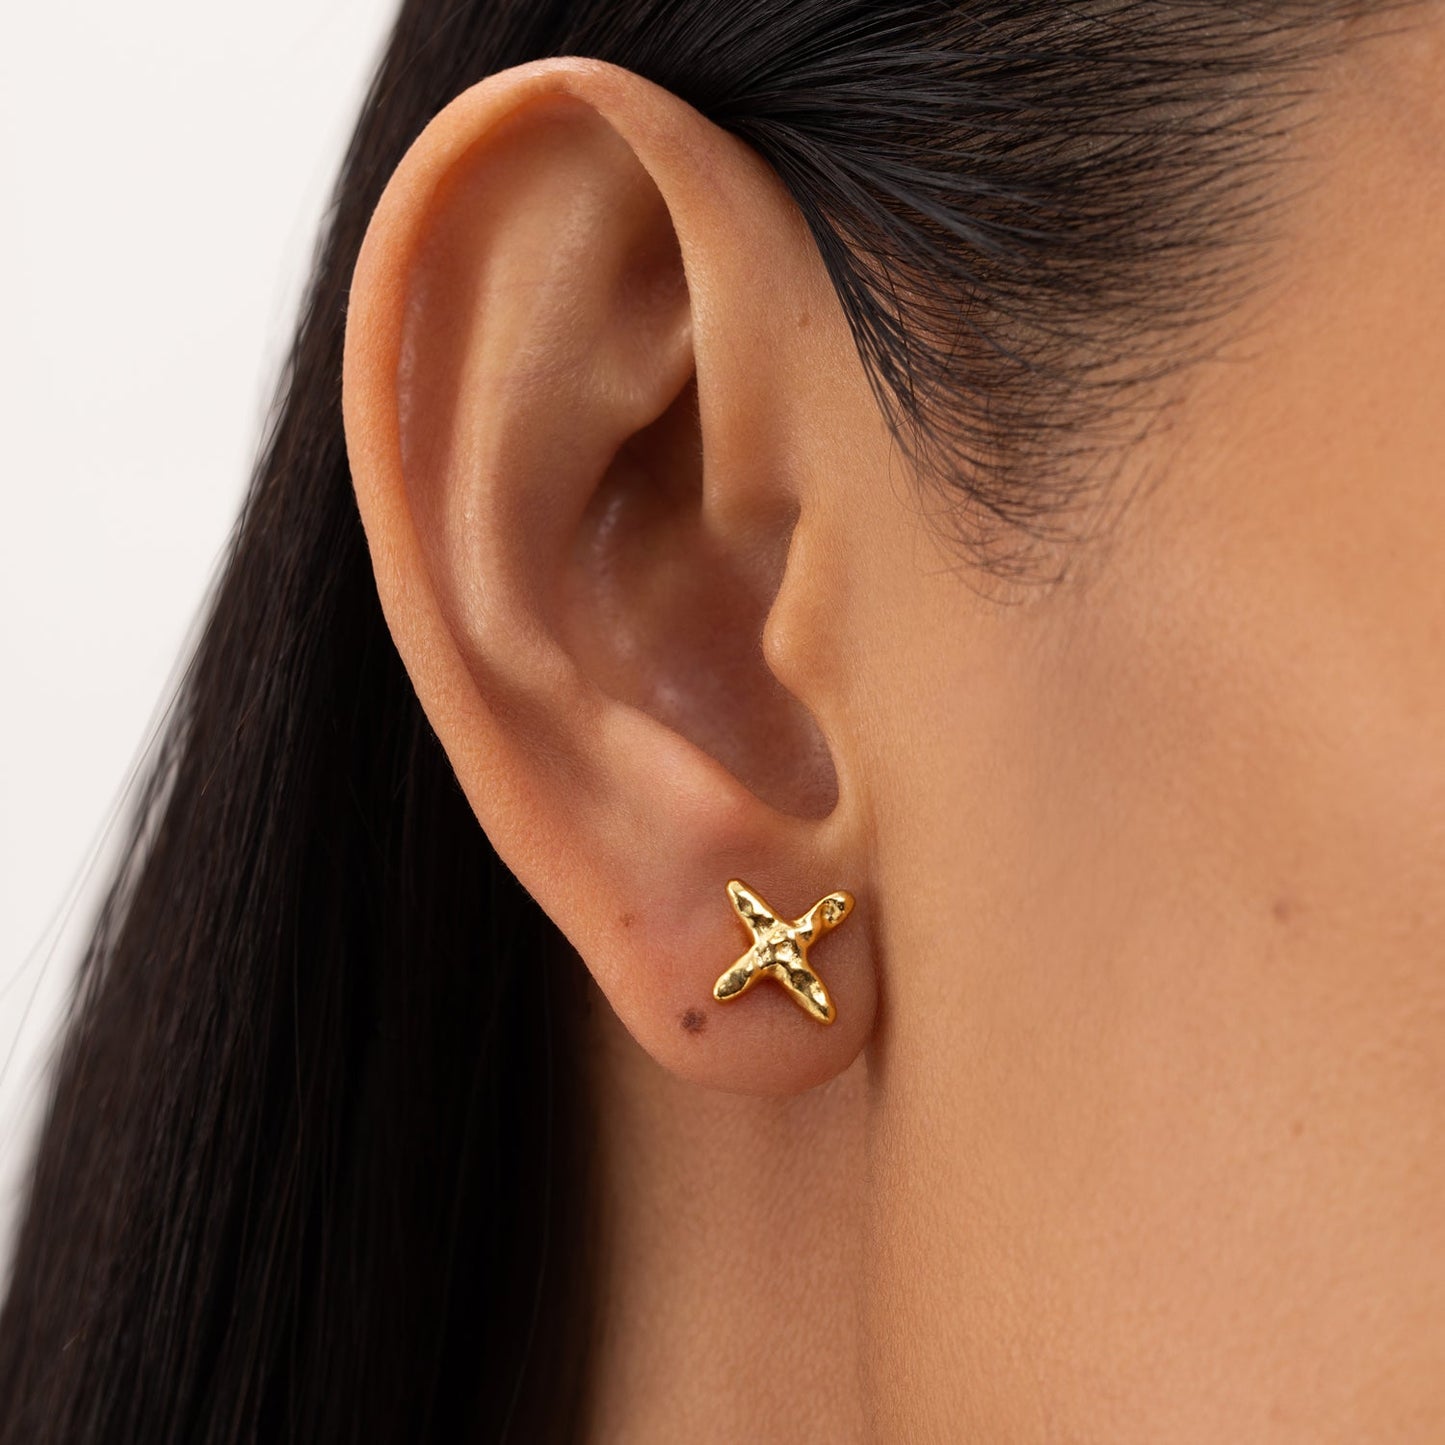 Close-up of ONEHE sustainable Stud Earrings CROSS in 18k gold, hypoallergenic and minimalist design, made from recycled silver.